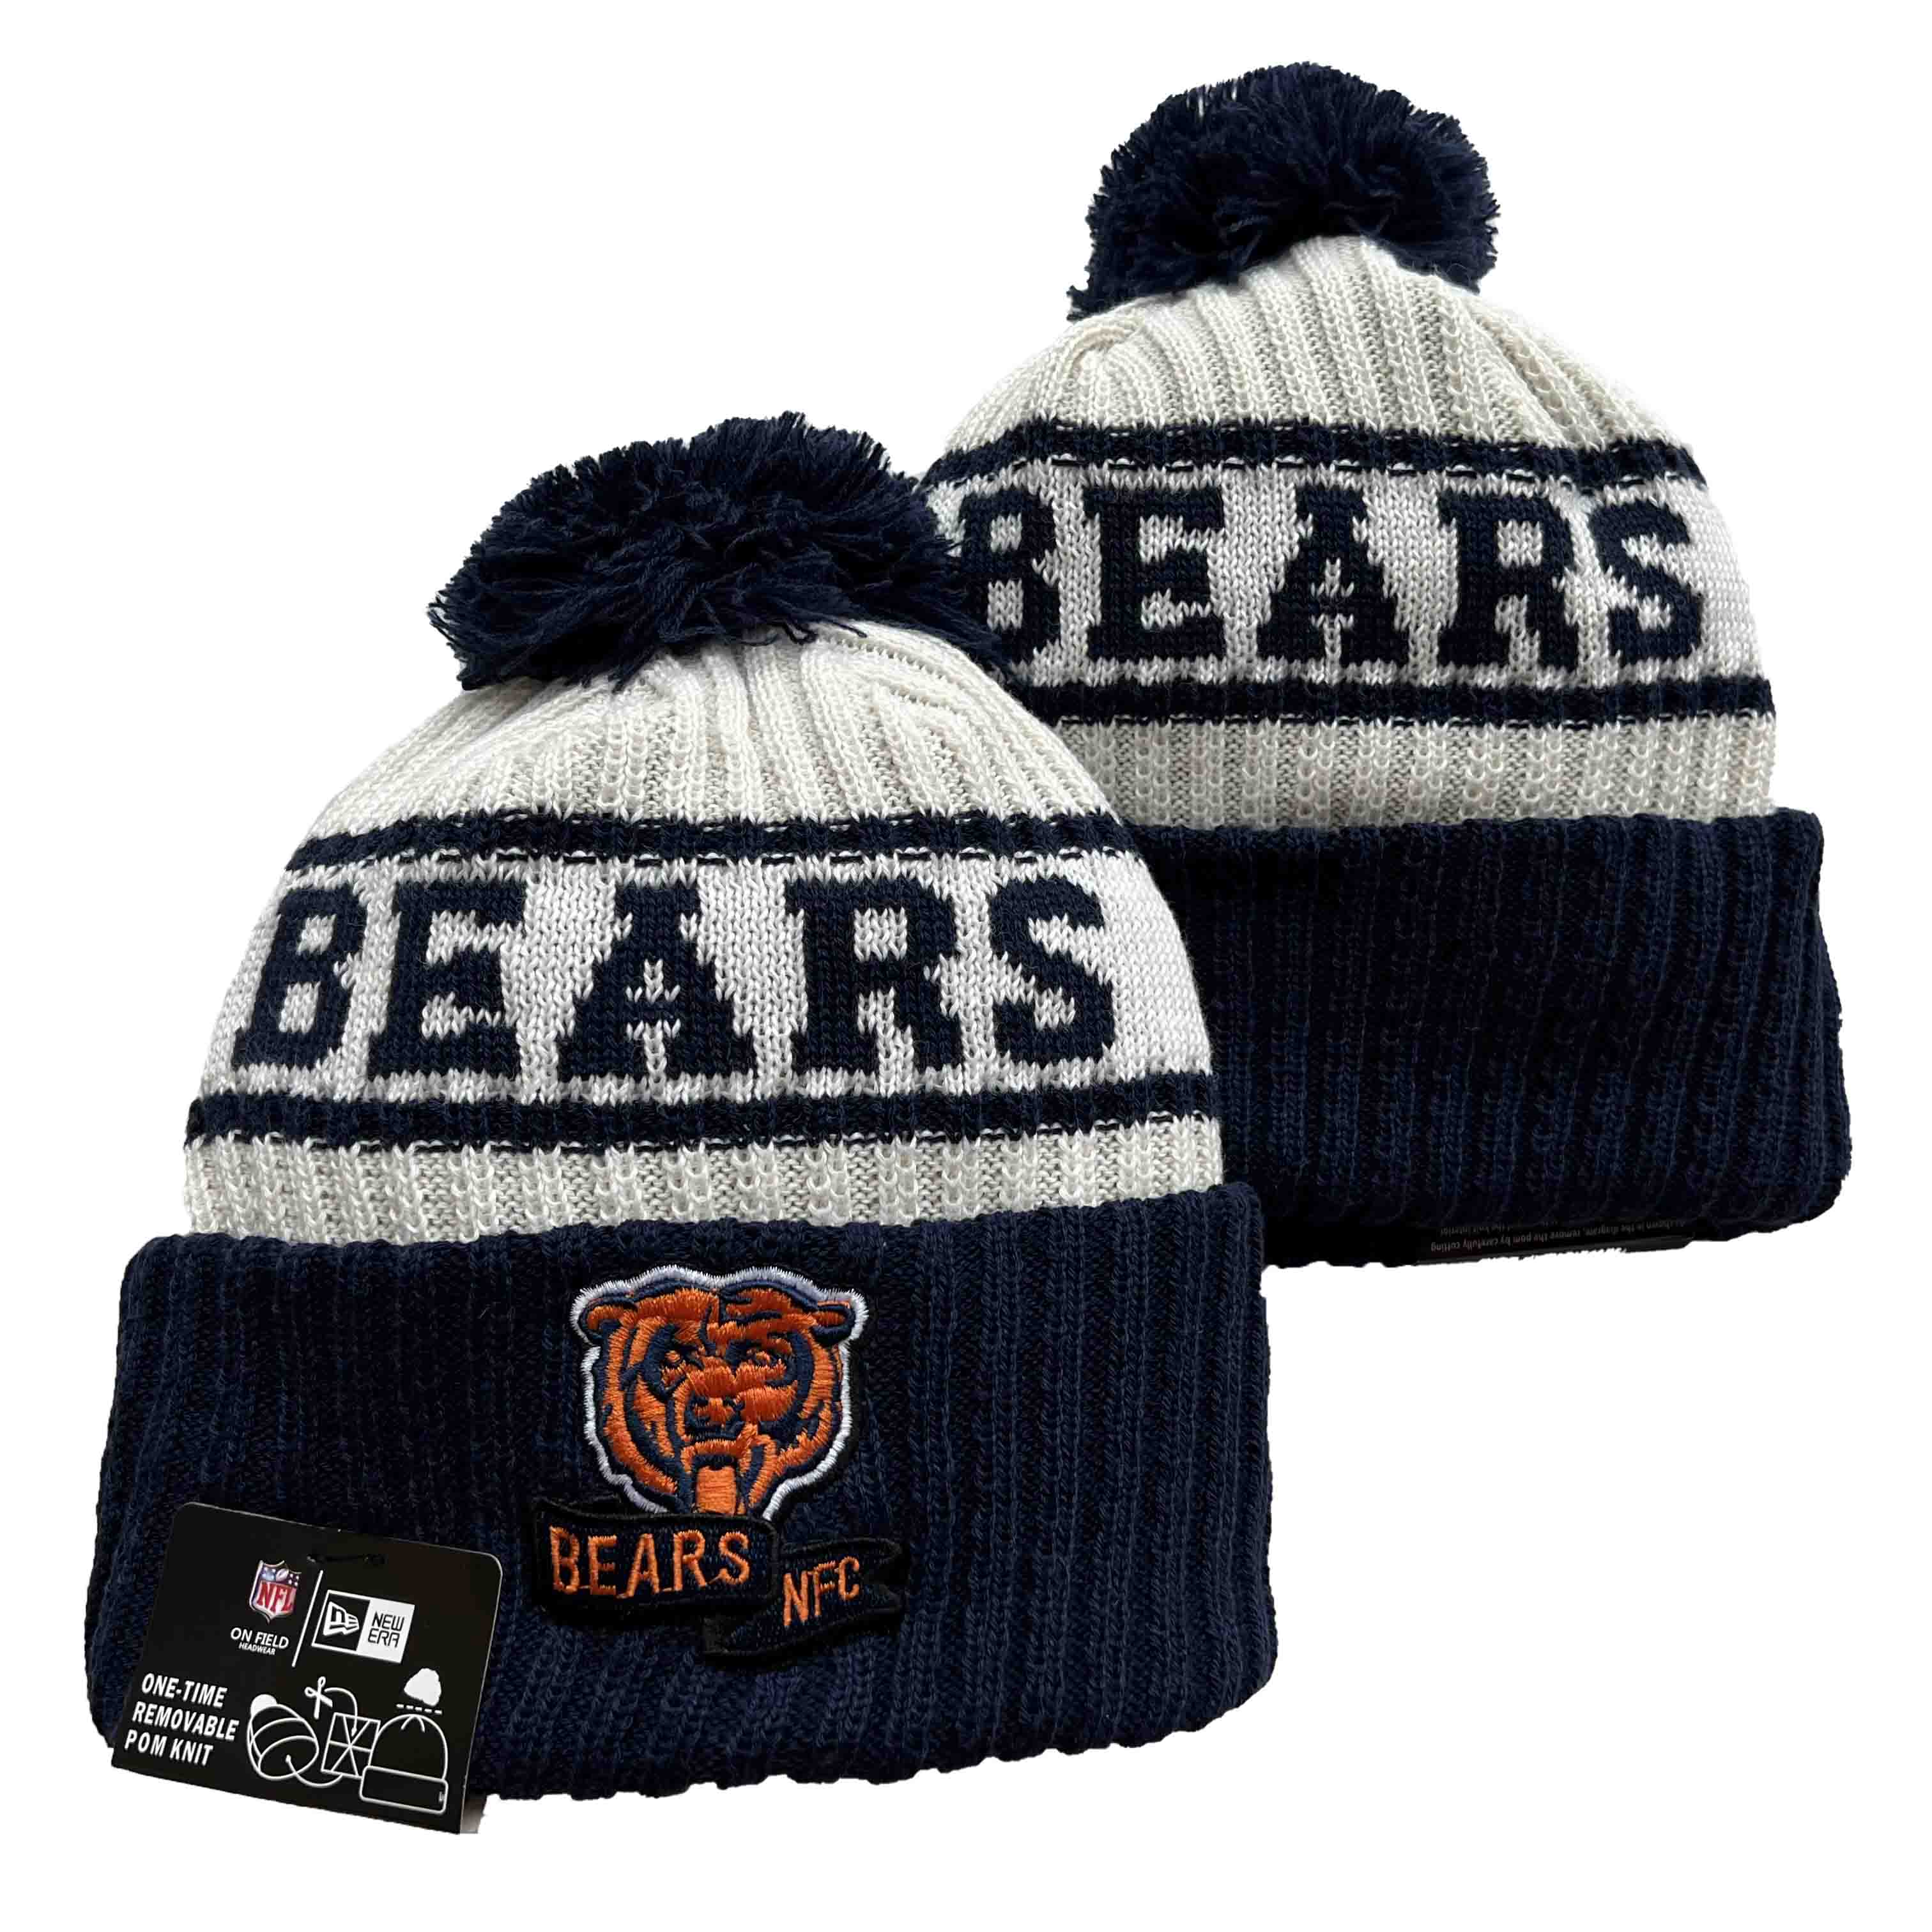 Chicago Bears Knit Hats -5